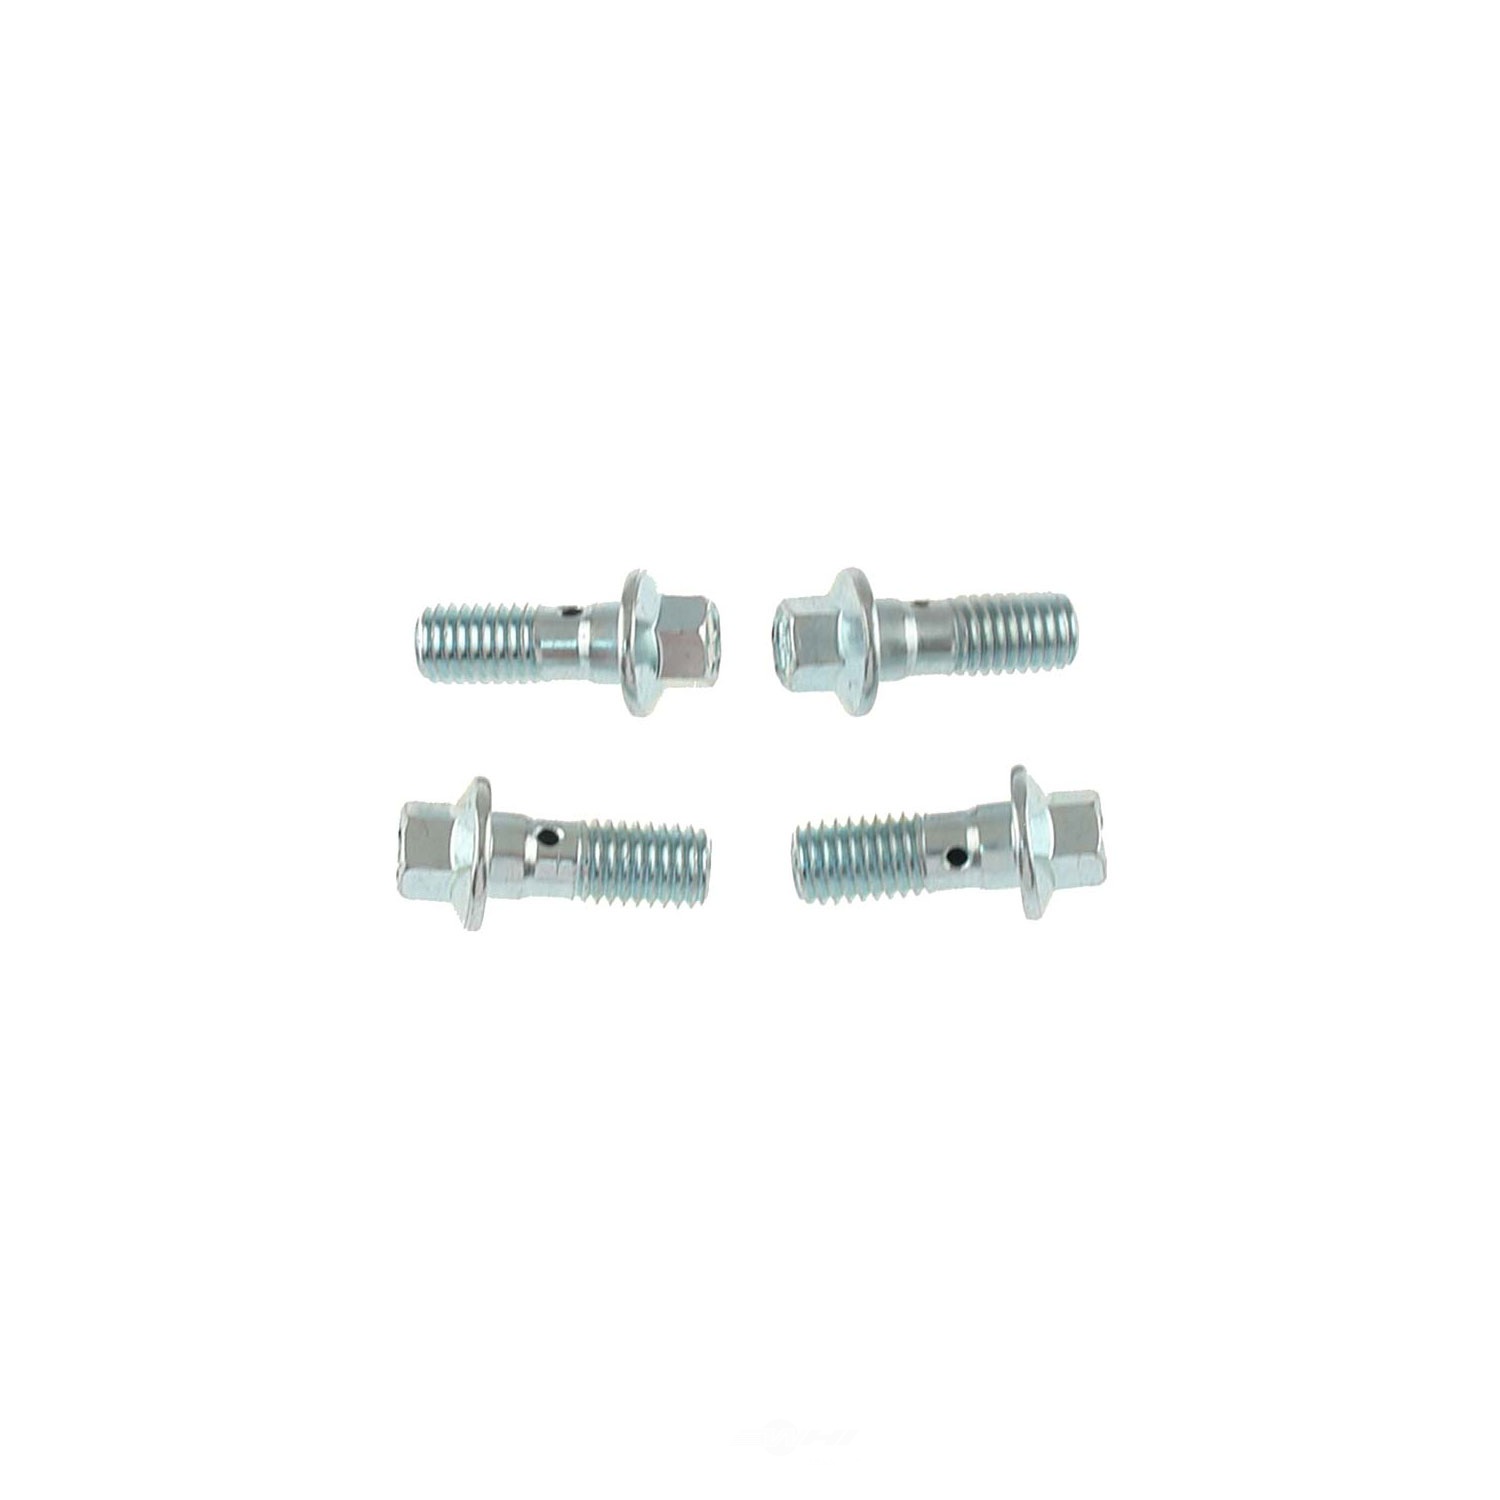 CARLSON QUALITY BRAKE PARTS - Contains 1 Bolt and 2 Washers (Front) - CRL H9469